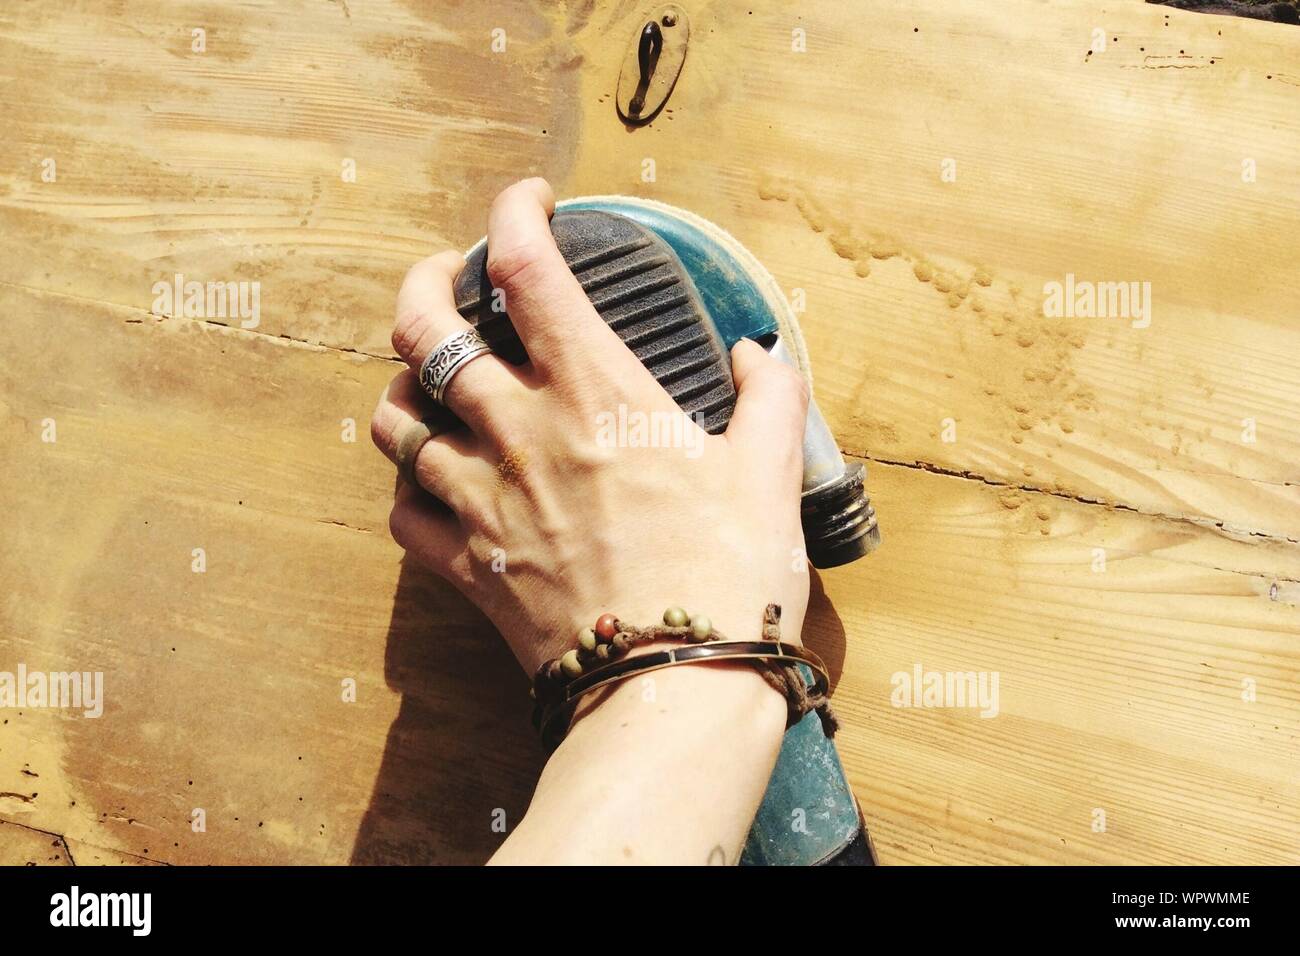 Man Hand Moving Sander On Wood Material Stock Photo